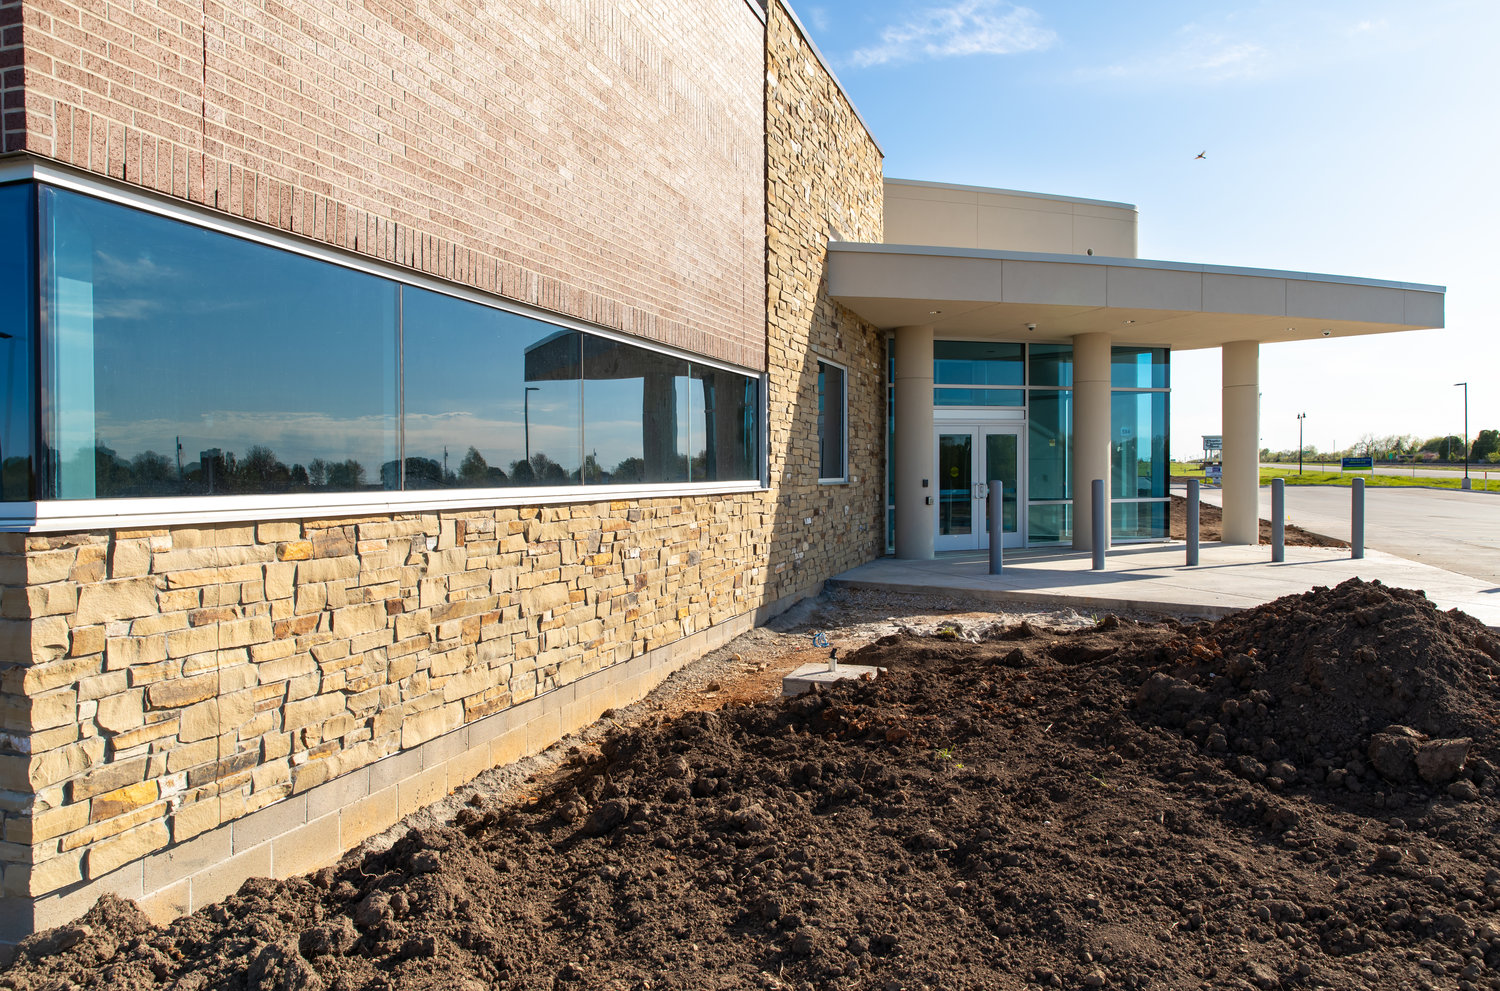 Construction wrapped up this month for Ozarks Technical Community College's Republic center.